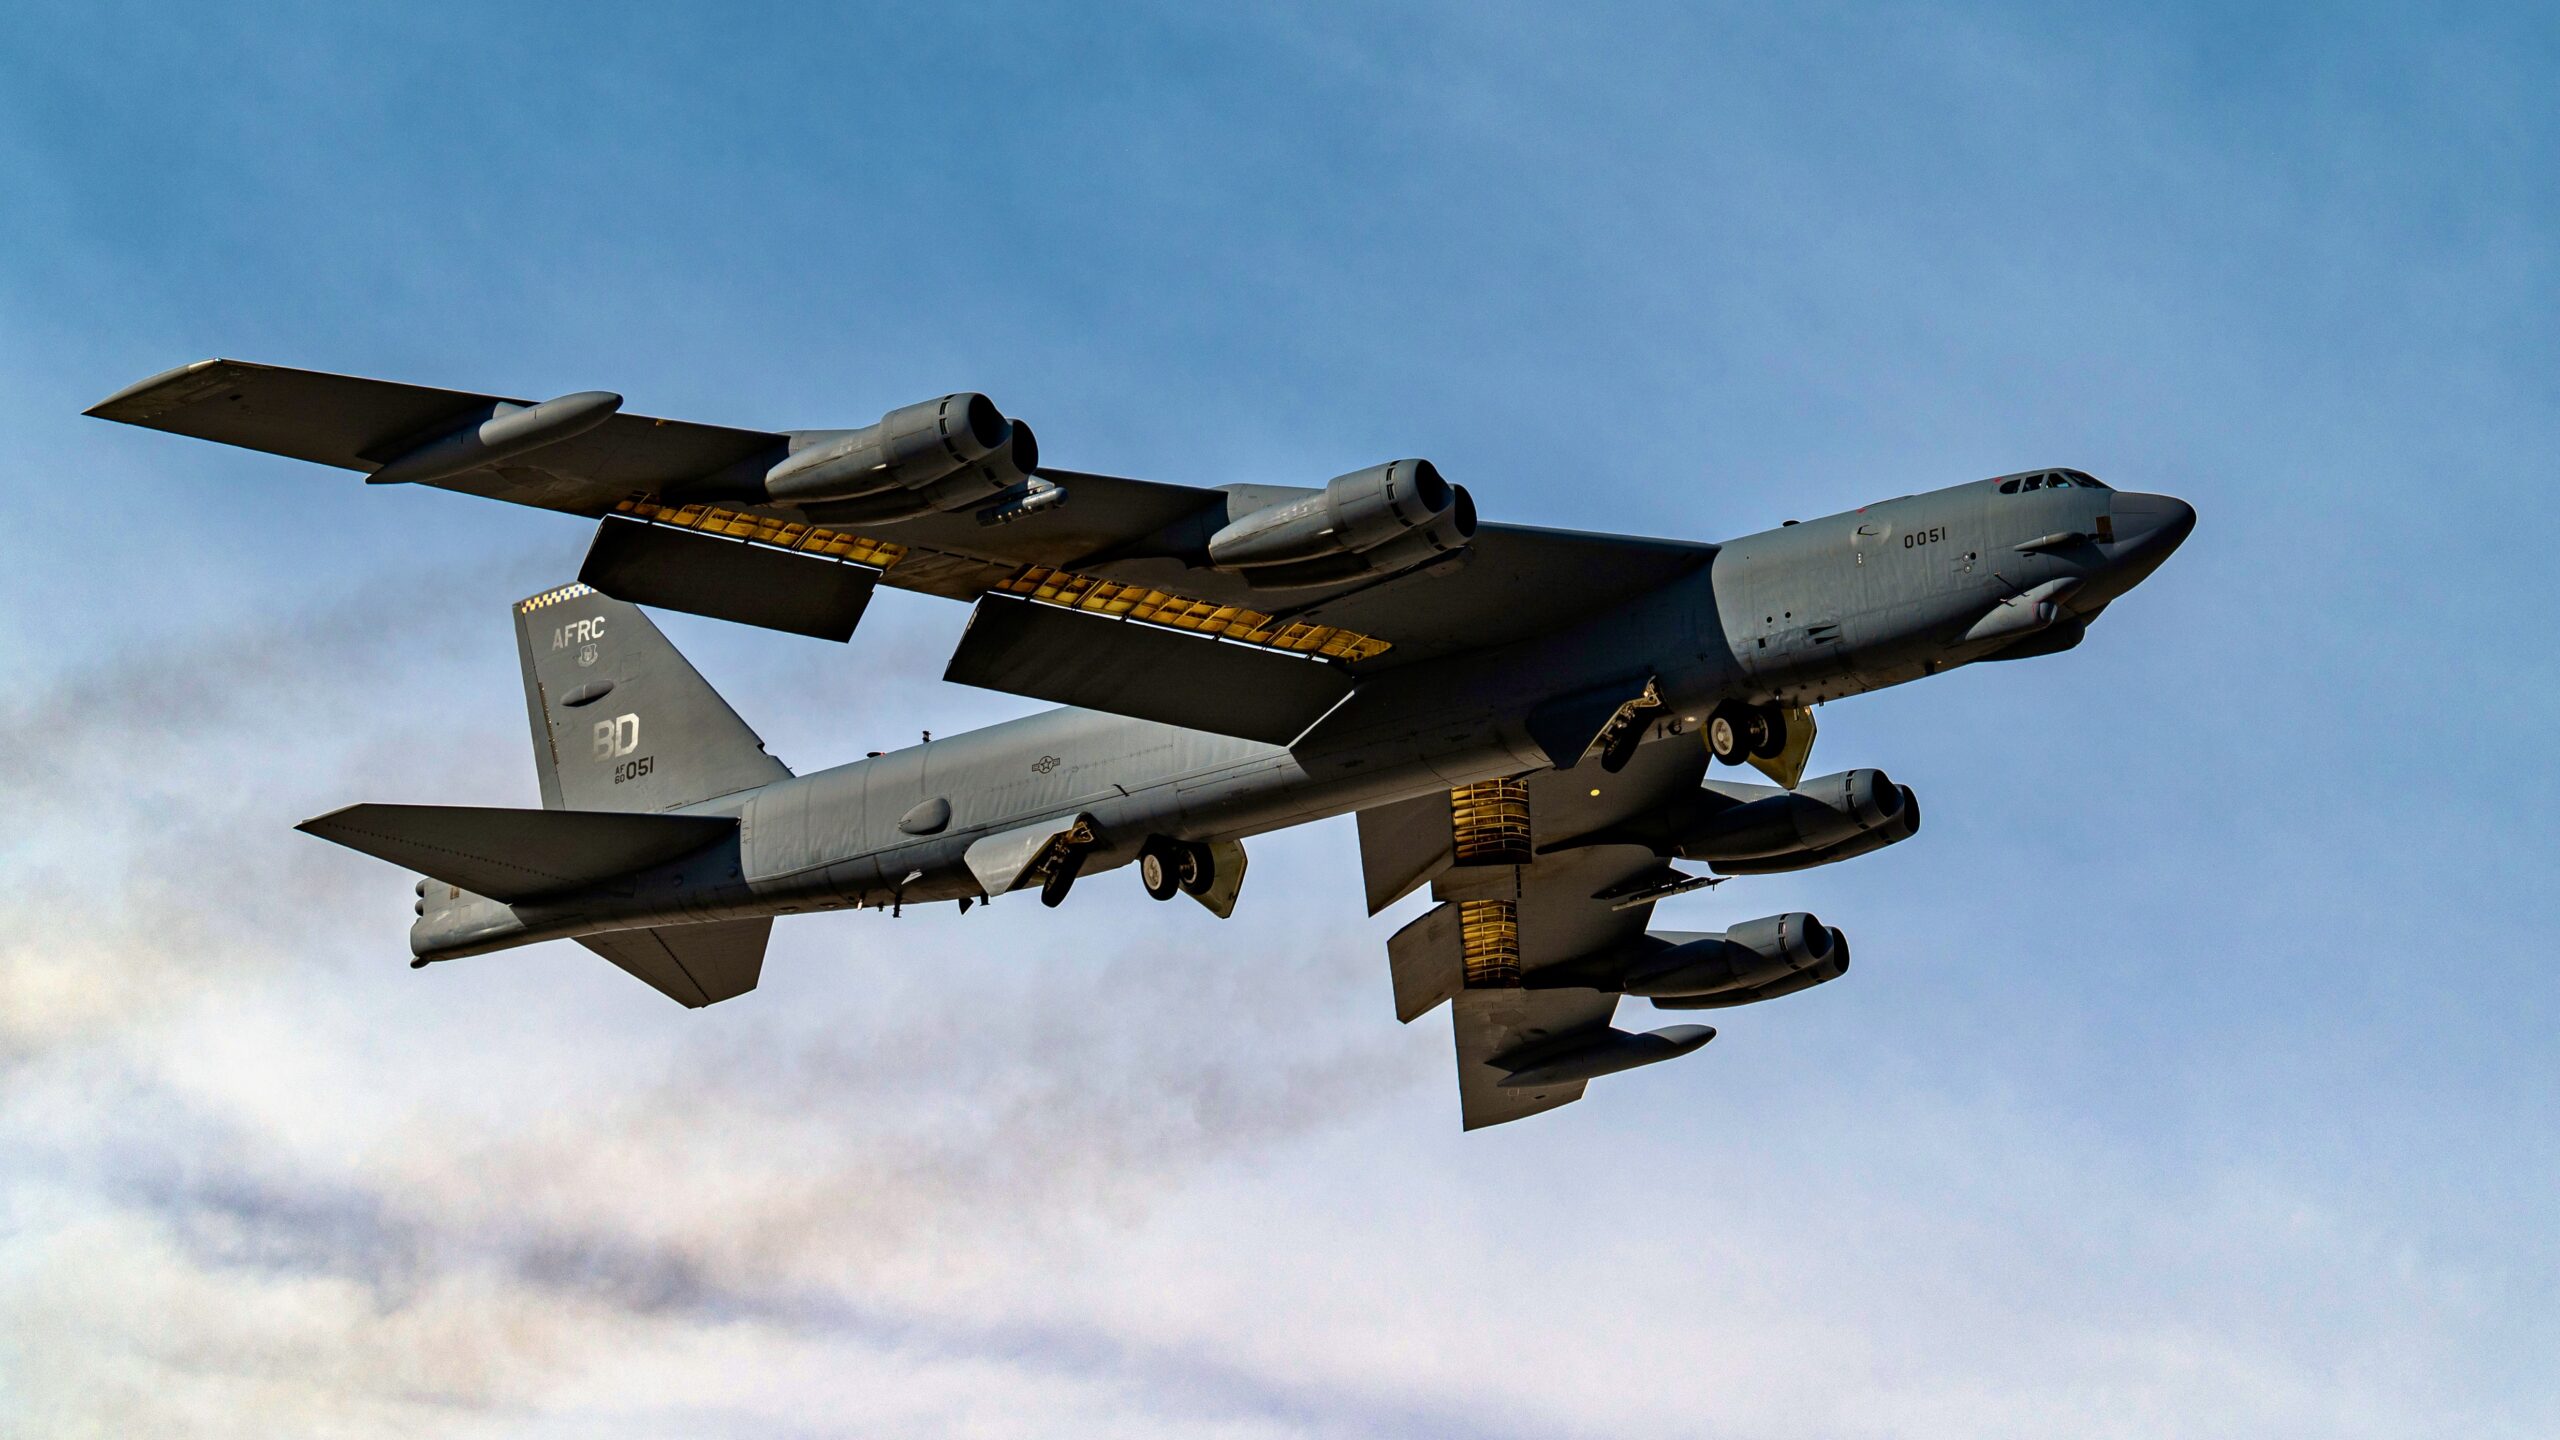 A B-52 Stratofortress assigned to the 340th Weapons Squadron at Barksdale Air Force Base, La.